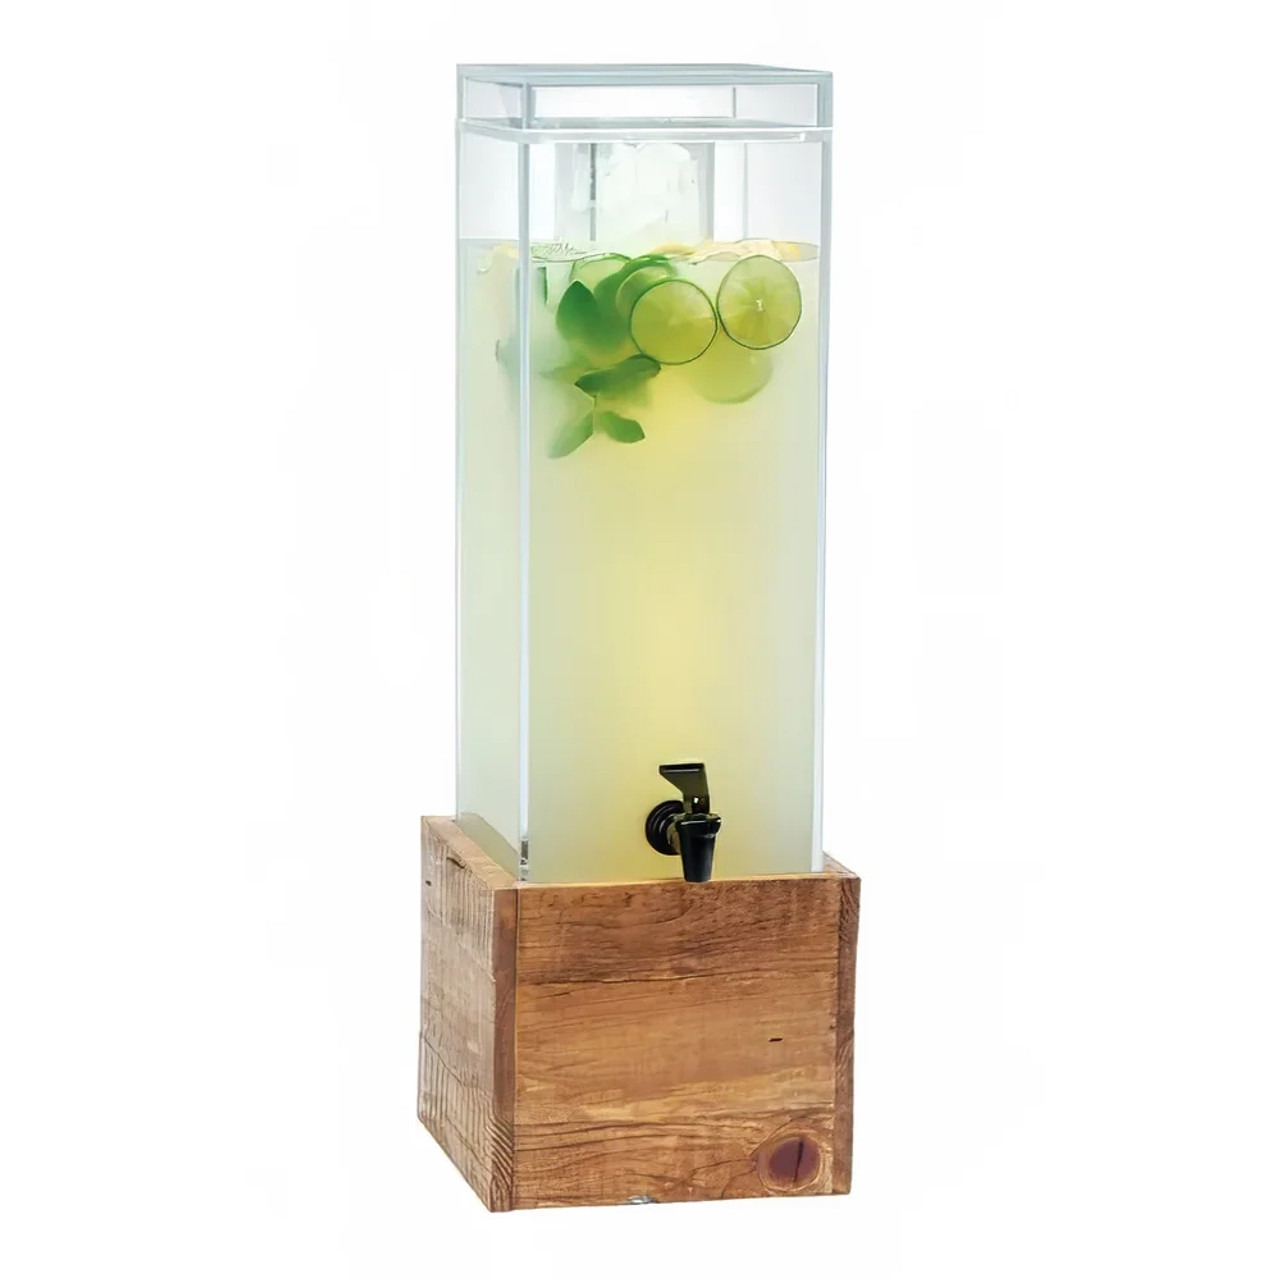 Cal-Mil 3 gal Beverage Dispenser w/ Infuser - Reclaimed Wood Base - Rustic Charm - Chicken Pieces